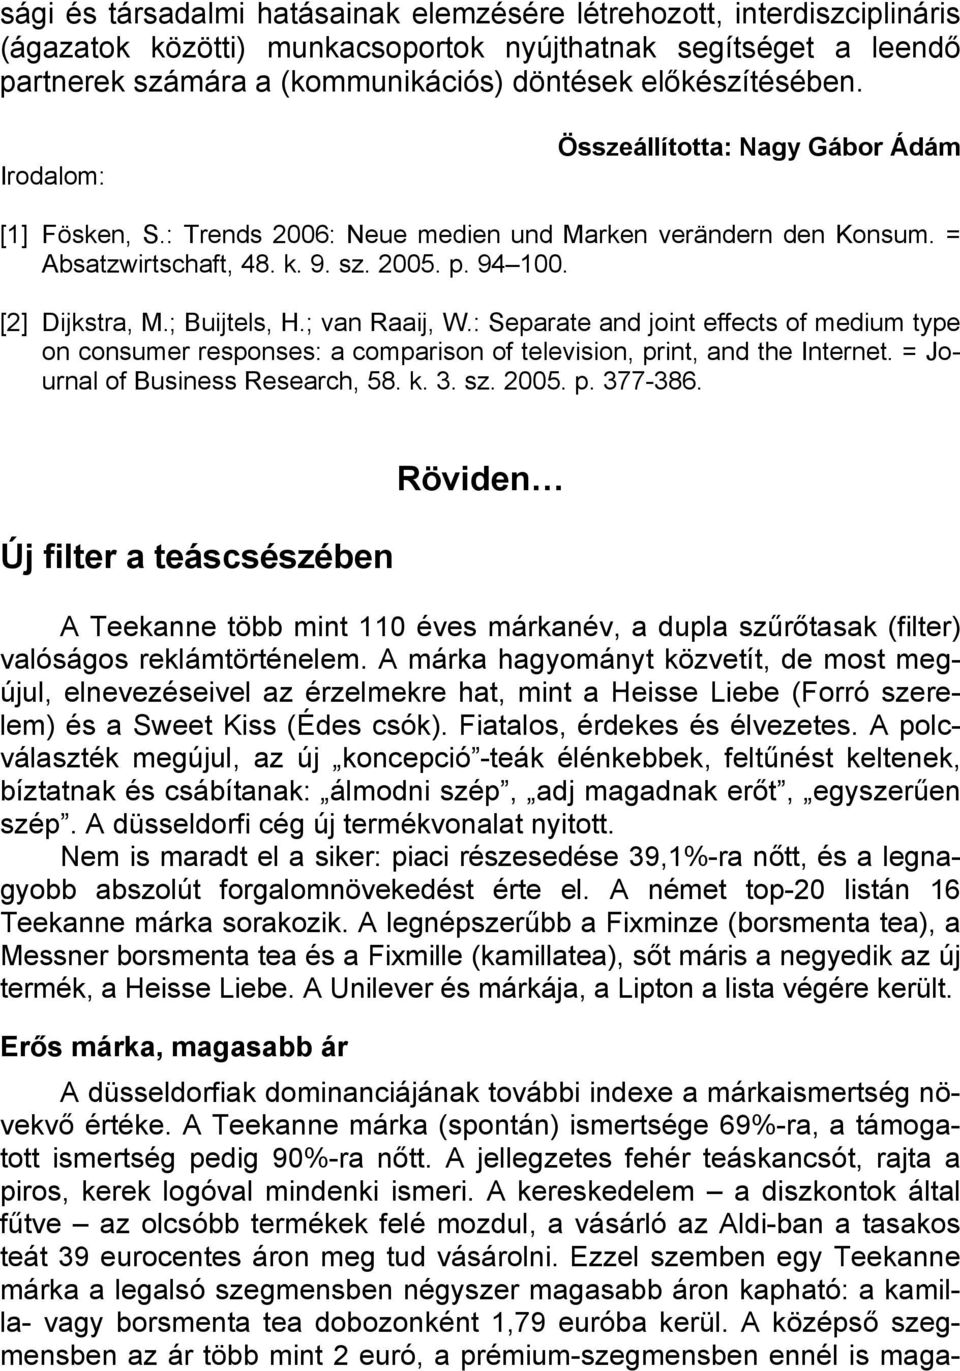 ; Buijtels, H.; van Raaij, W.: Separate and joint effects of medium type on consumer responses: a comparison of television, print, and the Internet. = Journal of Business Research, 58. k. 3. sz. 2005.